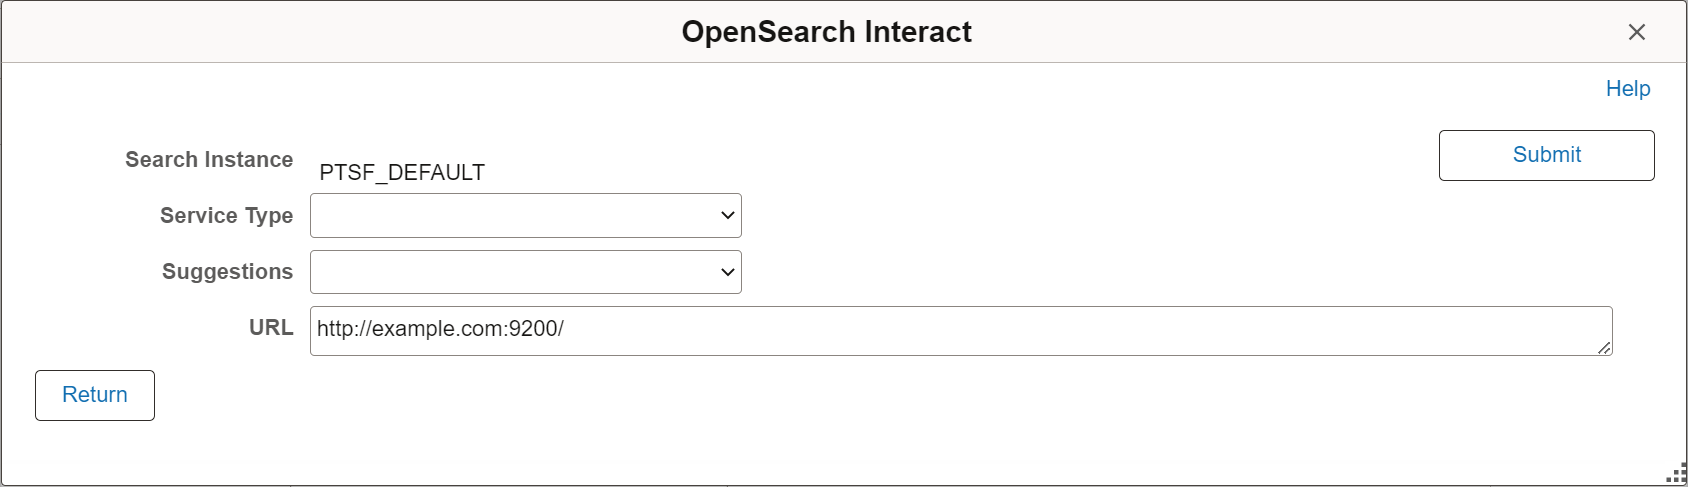 OpenSearch Interact page (initial)